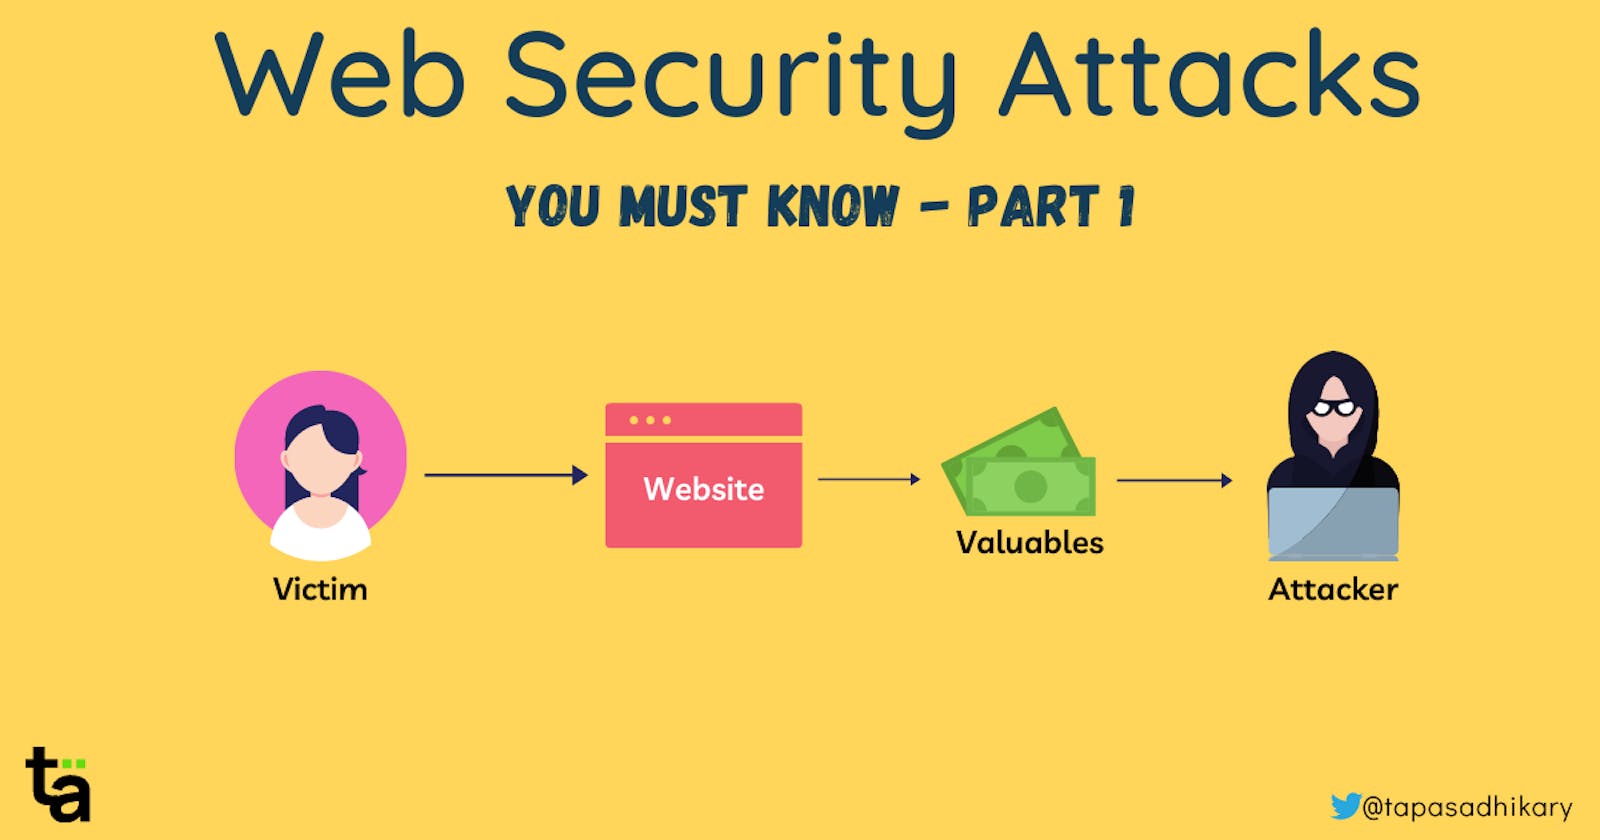 Web security attacks you must know - Part 1